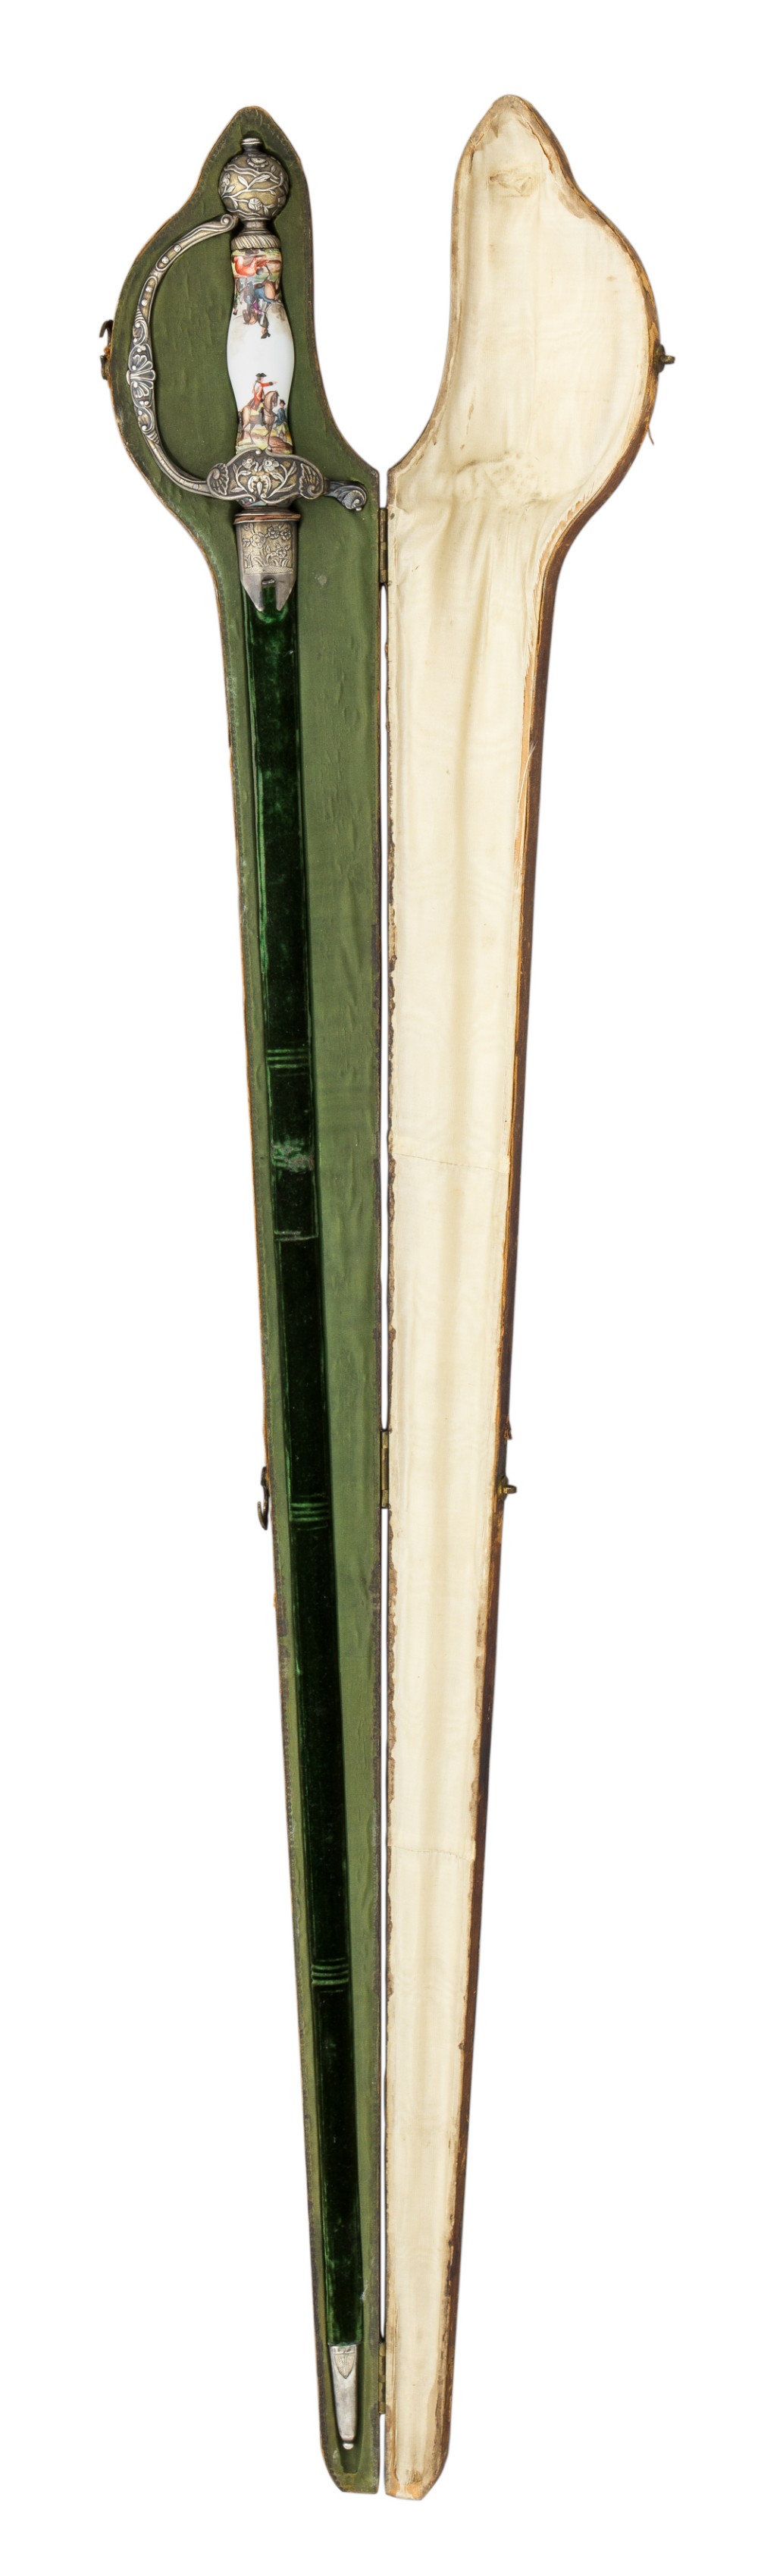 A FINE CASED GERMAN SMALL-SWORD WITH SILVER-GILT HILT AND PAINTED PORCELAIN GRIP, THIRD QUARTER OF